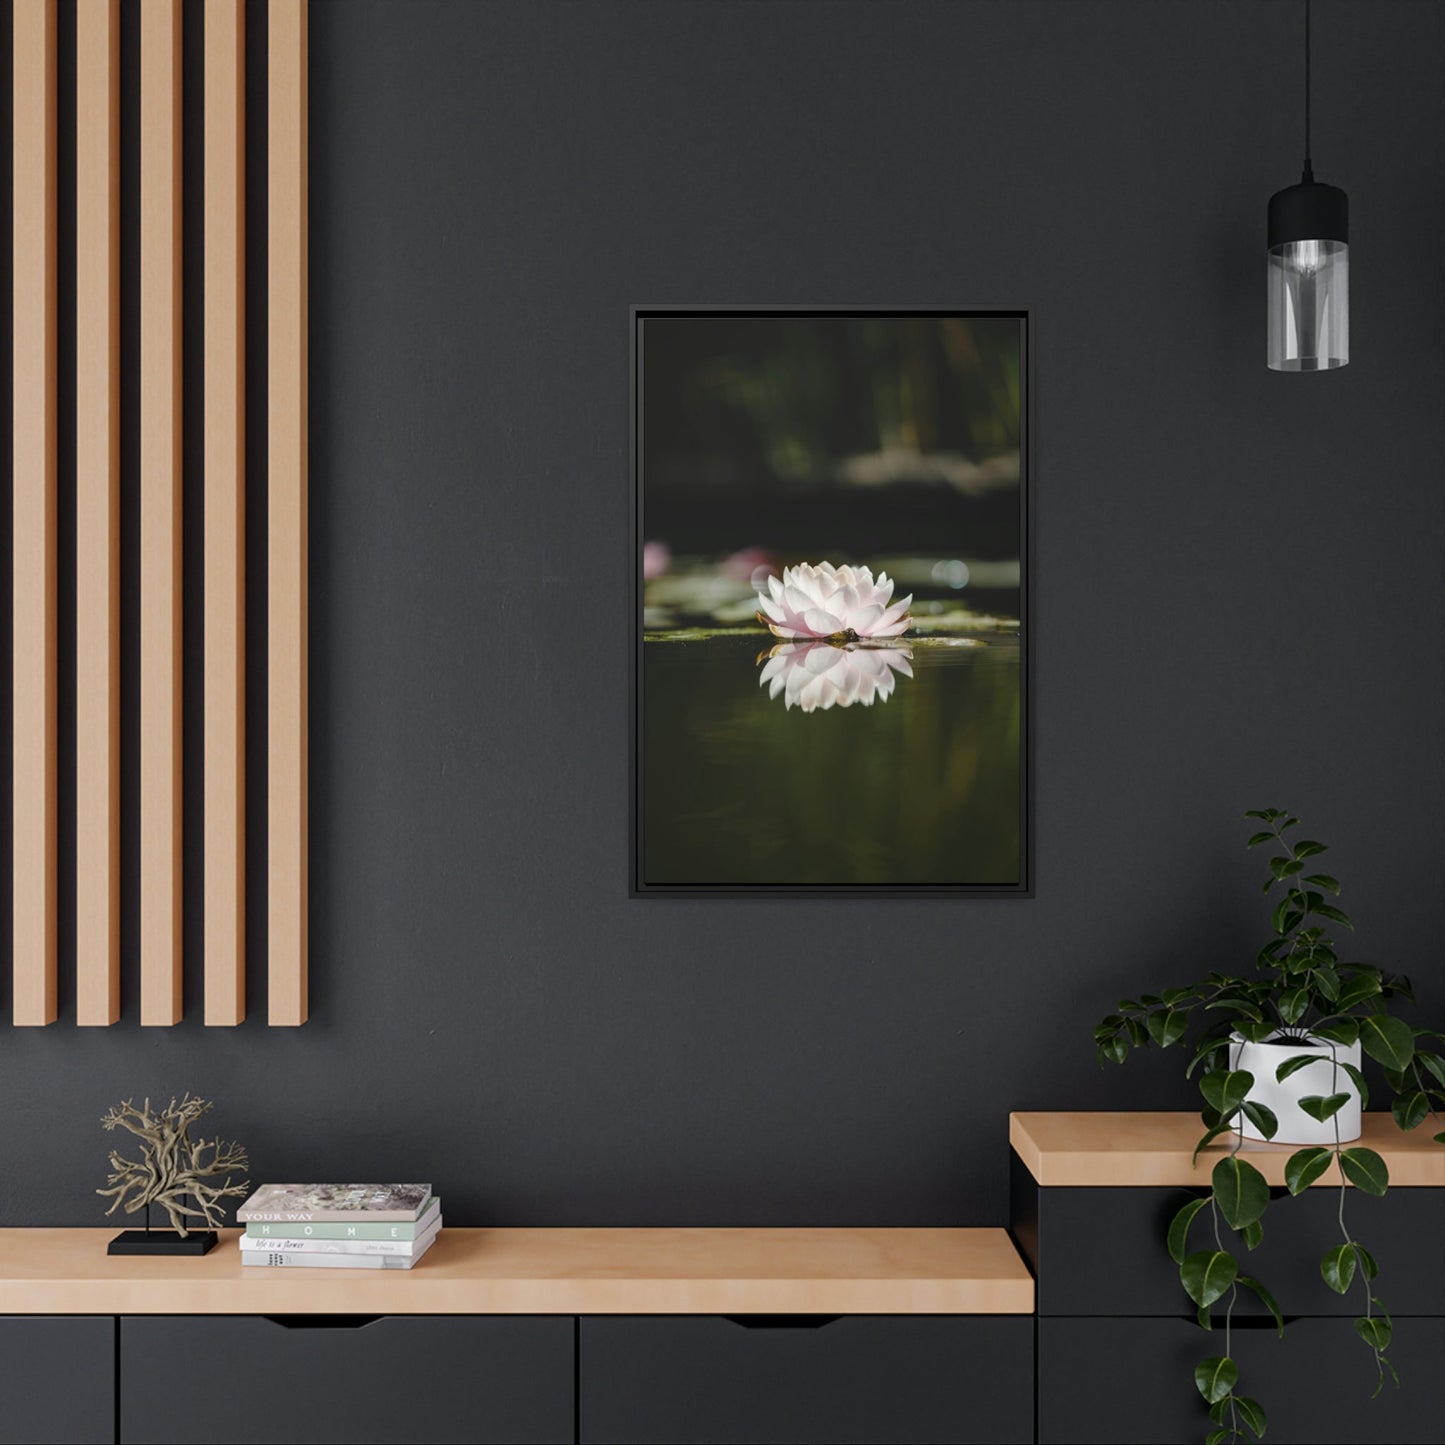 Waterlily Paradise: A Canvas of Natural Tranquility